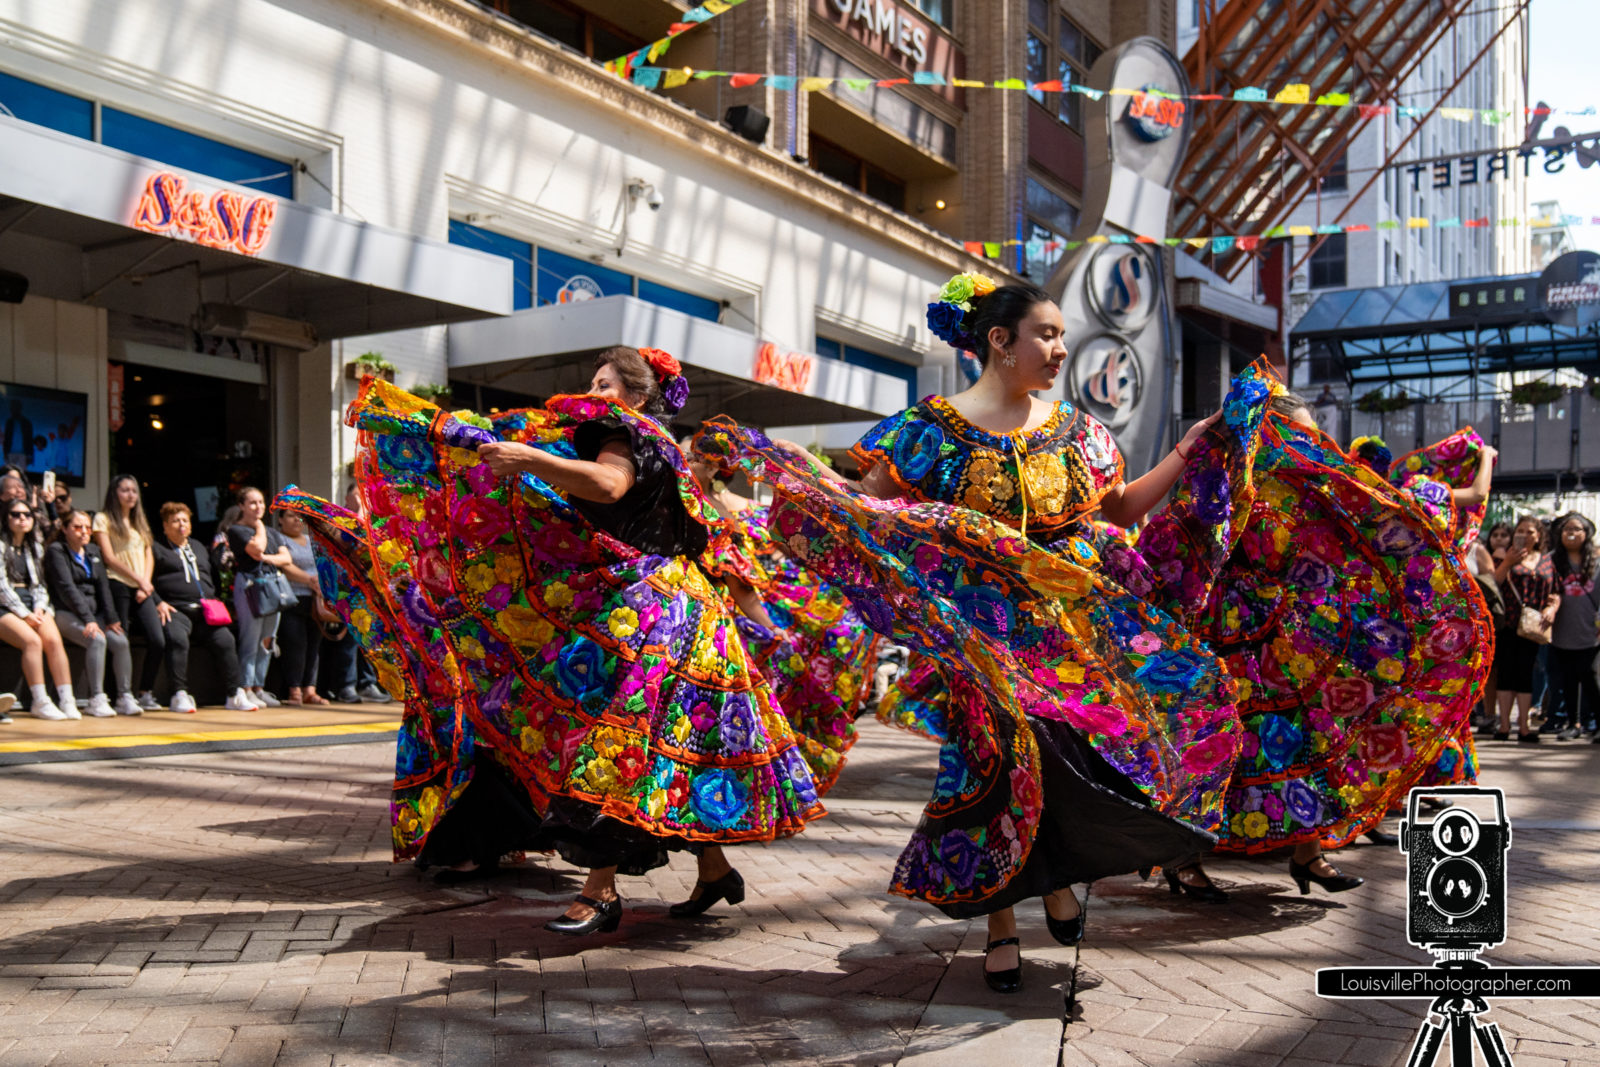 Louisville Event Photographer - Cinco de Mayo at 4th St. Live